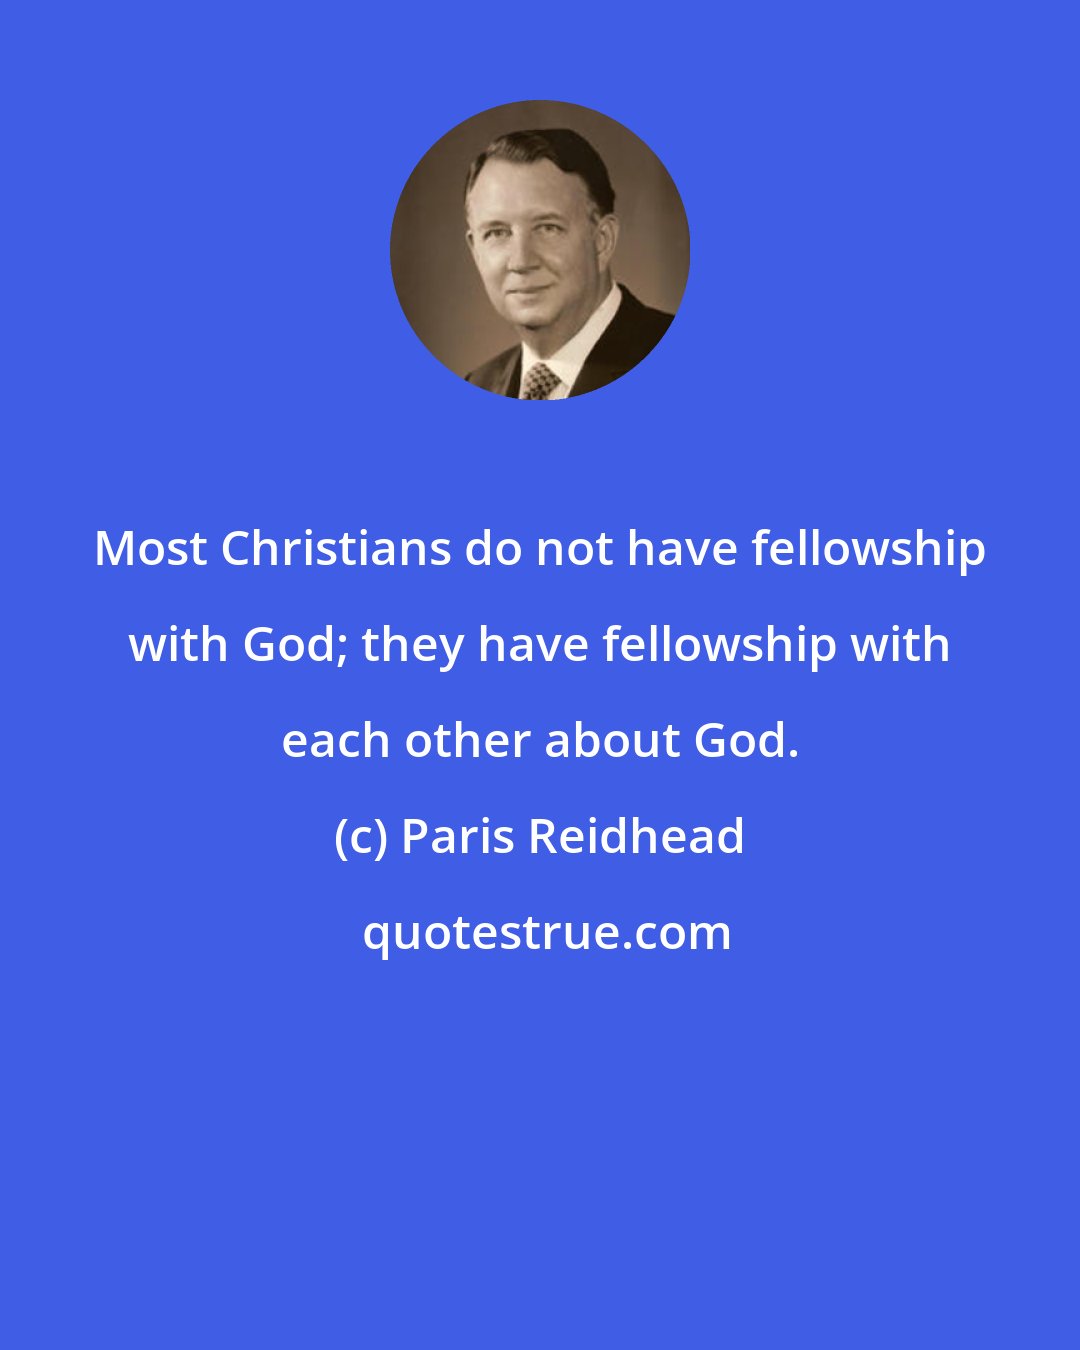 Paris Reidhead: Most Christians do not have fellowship with God; they have fellowship with each other about God.